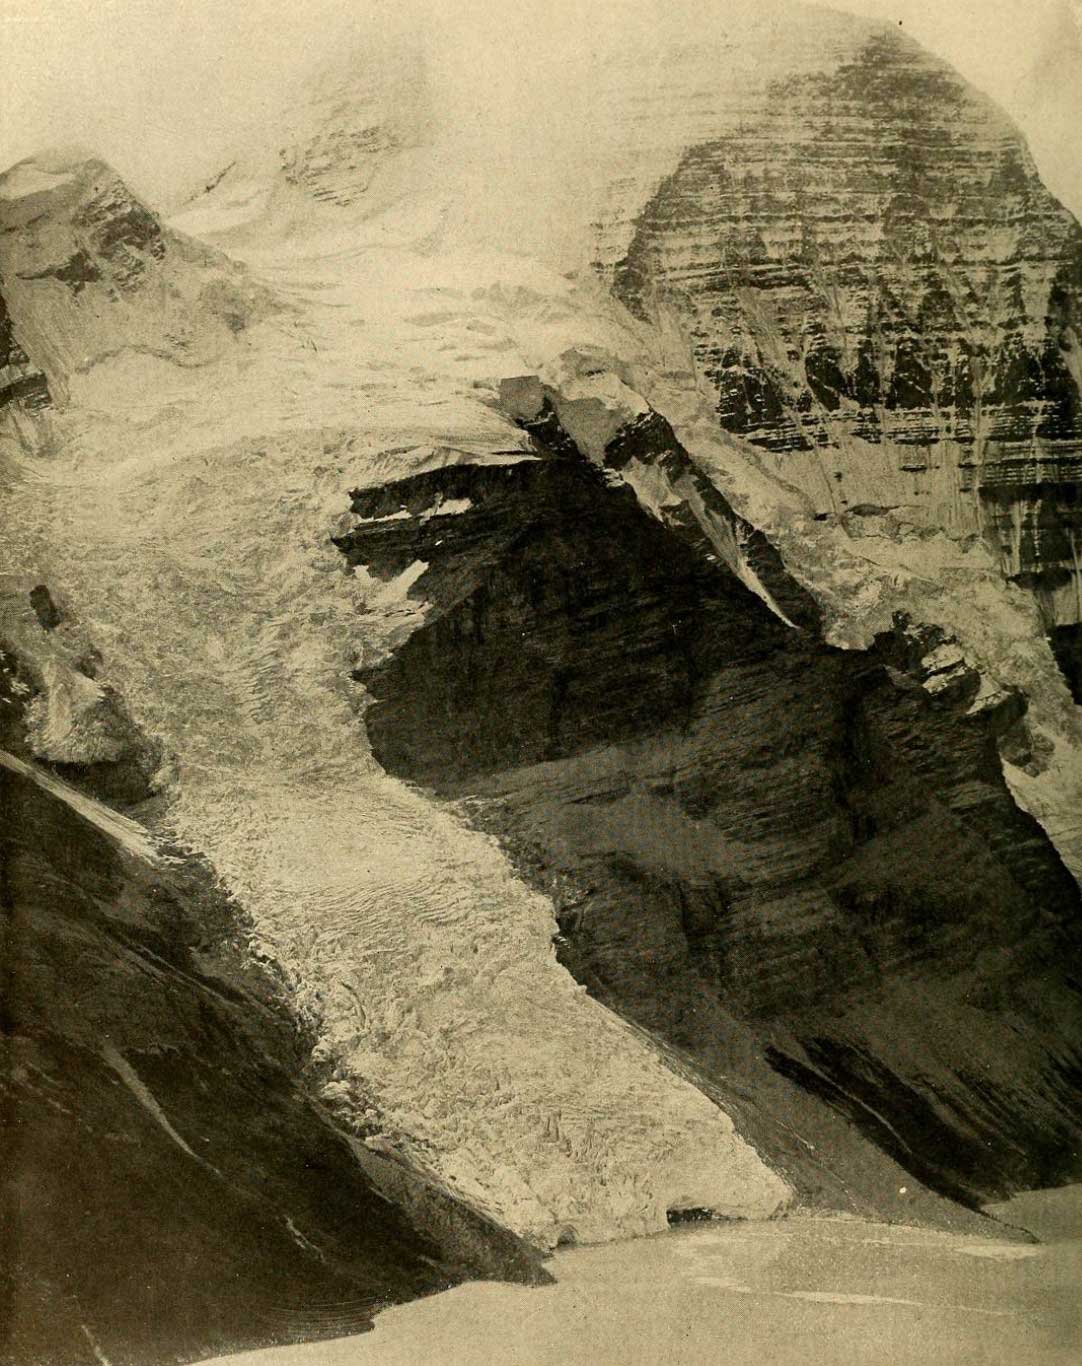 View of Blue or Tumbling Glacier from its névé on the slope of Robson Peak to where its foot enters Berg Lake, a descent of 5,000 feet. Photo: R. C. W. Lett